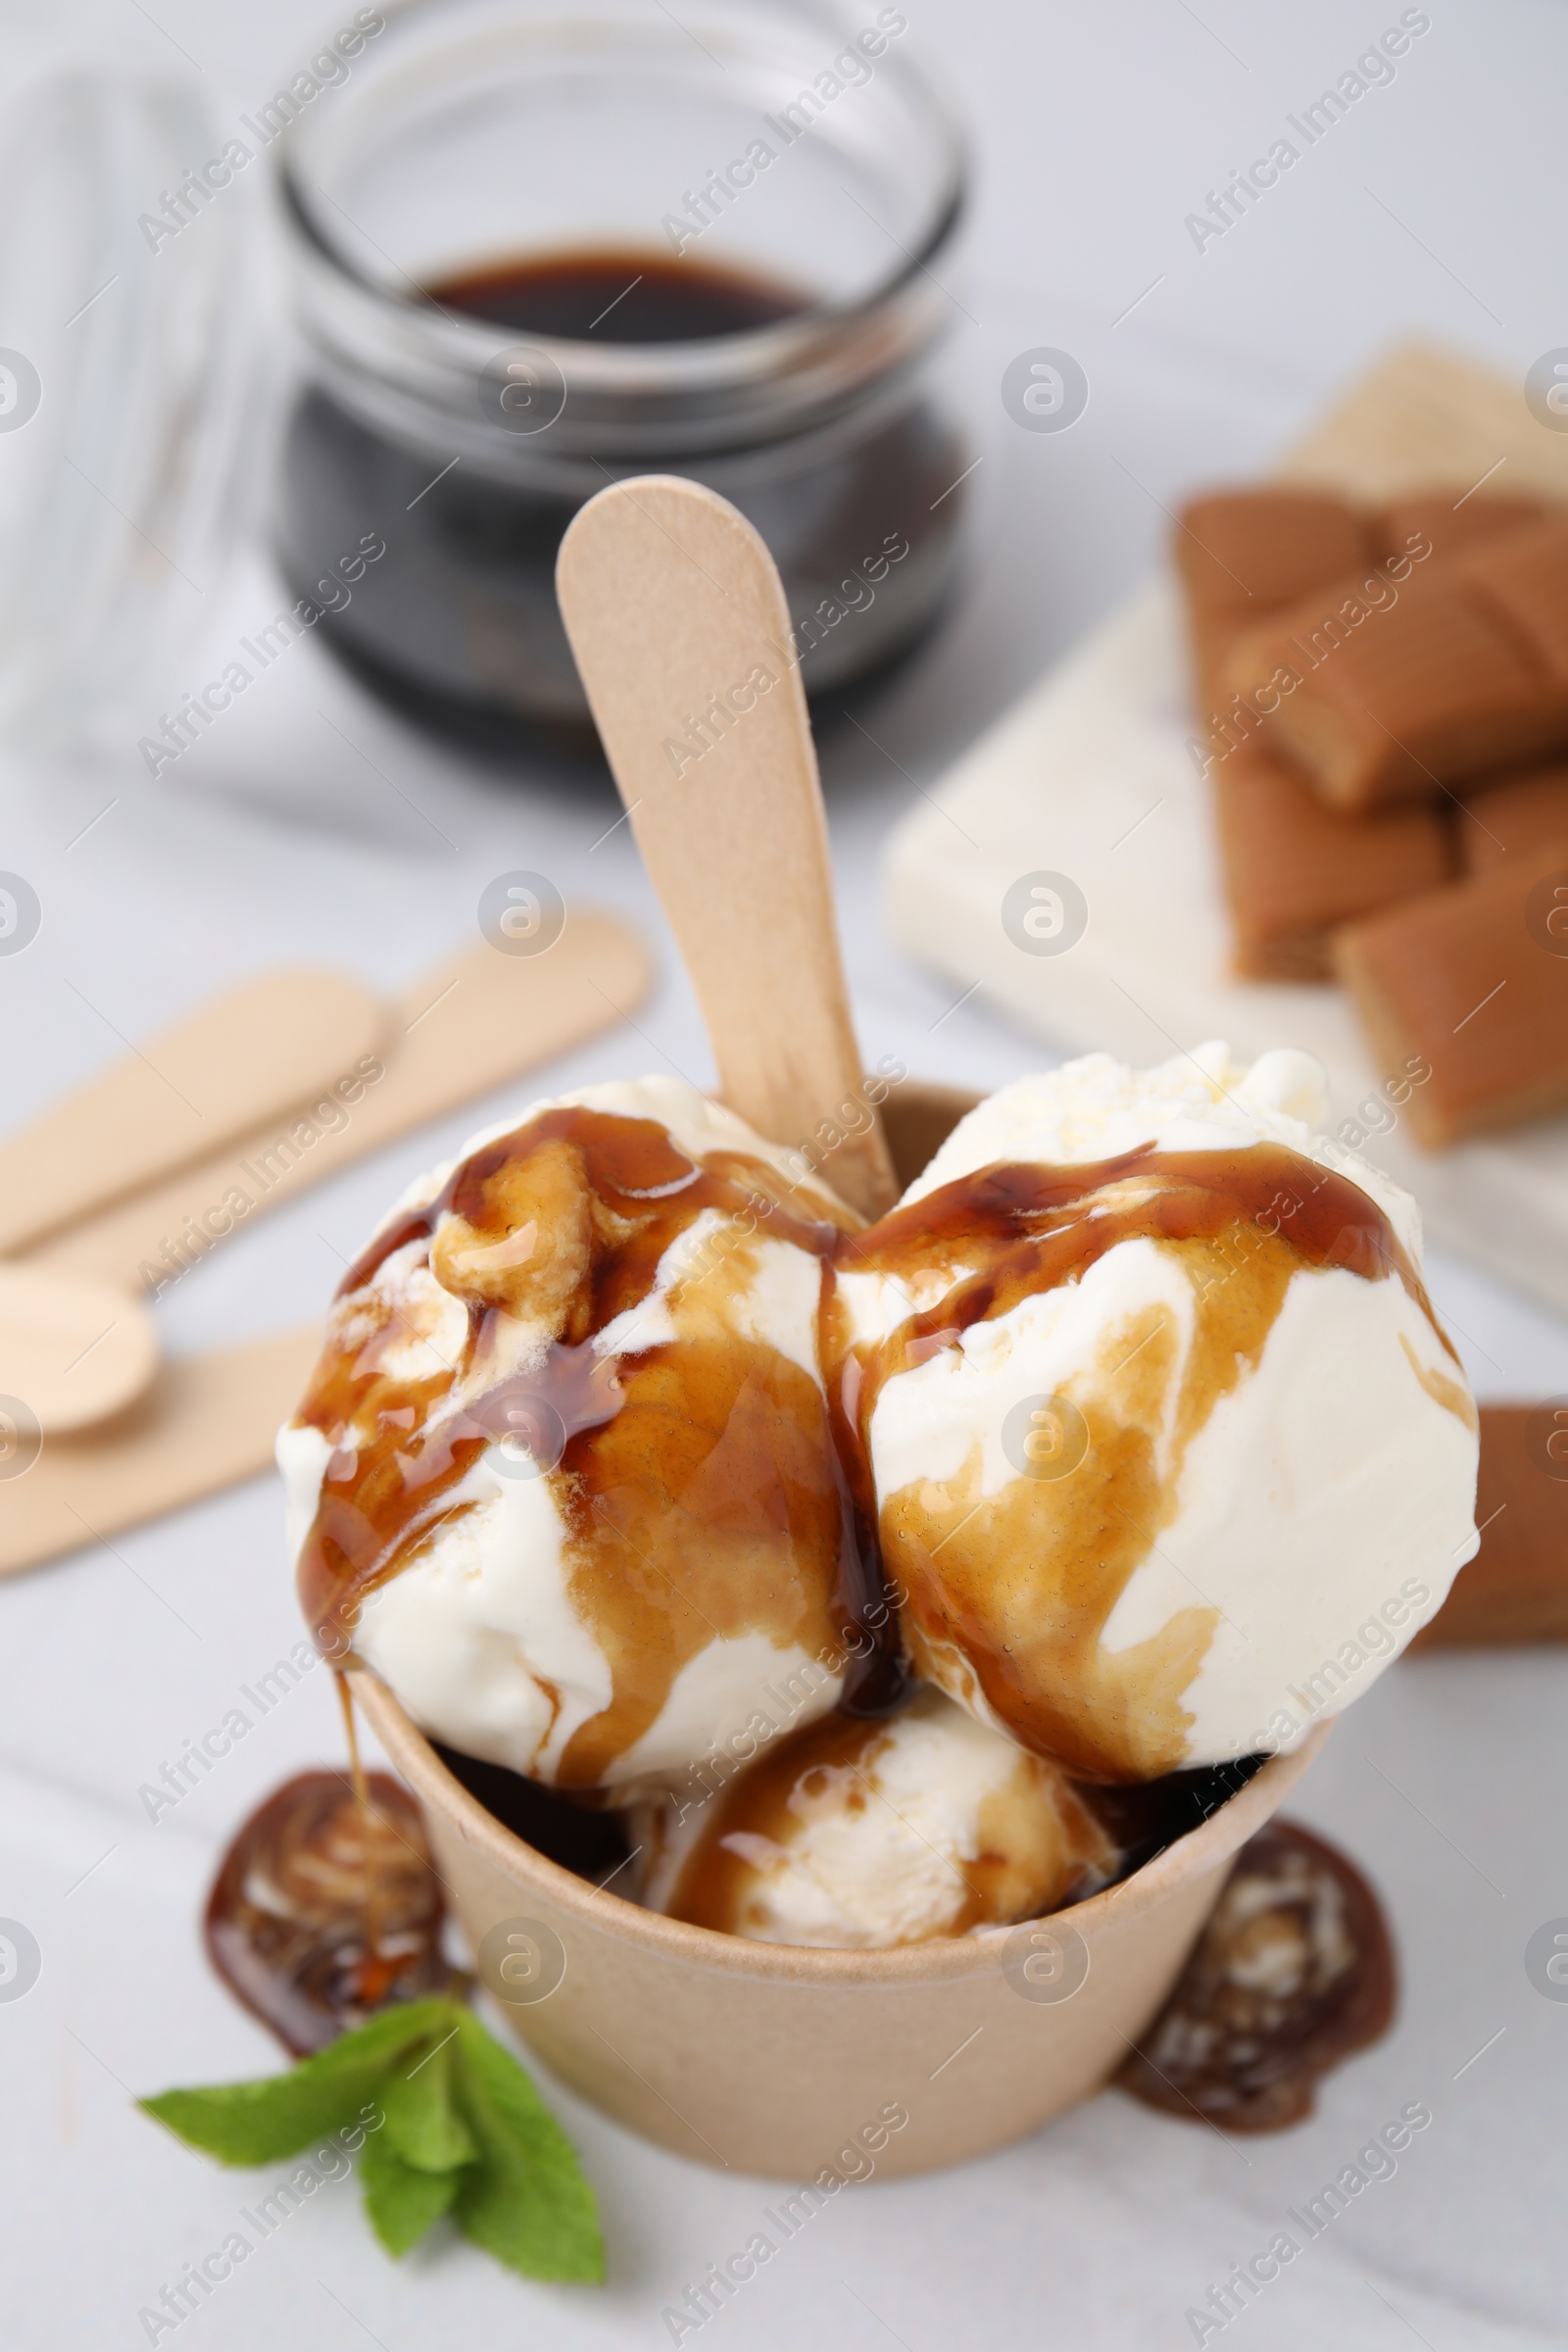 Photo of Scoops of ice cream with caramel sauce in paper cup on white table